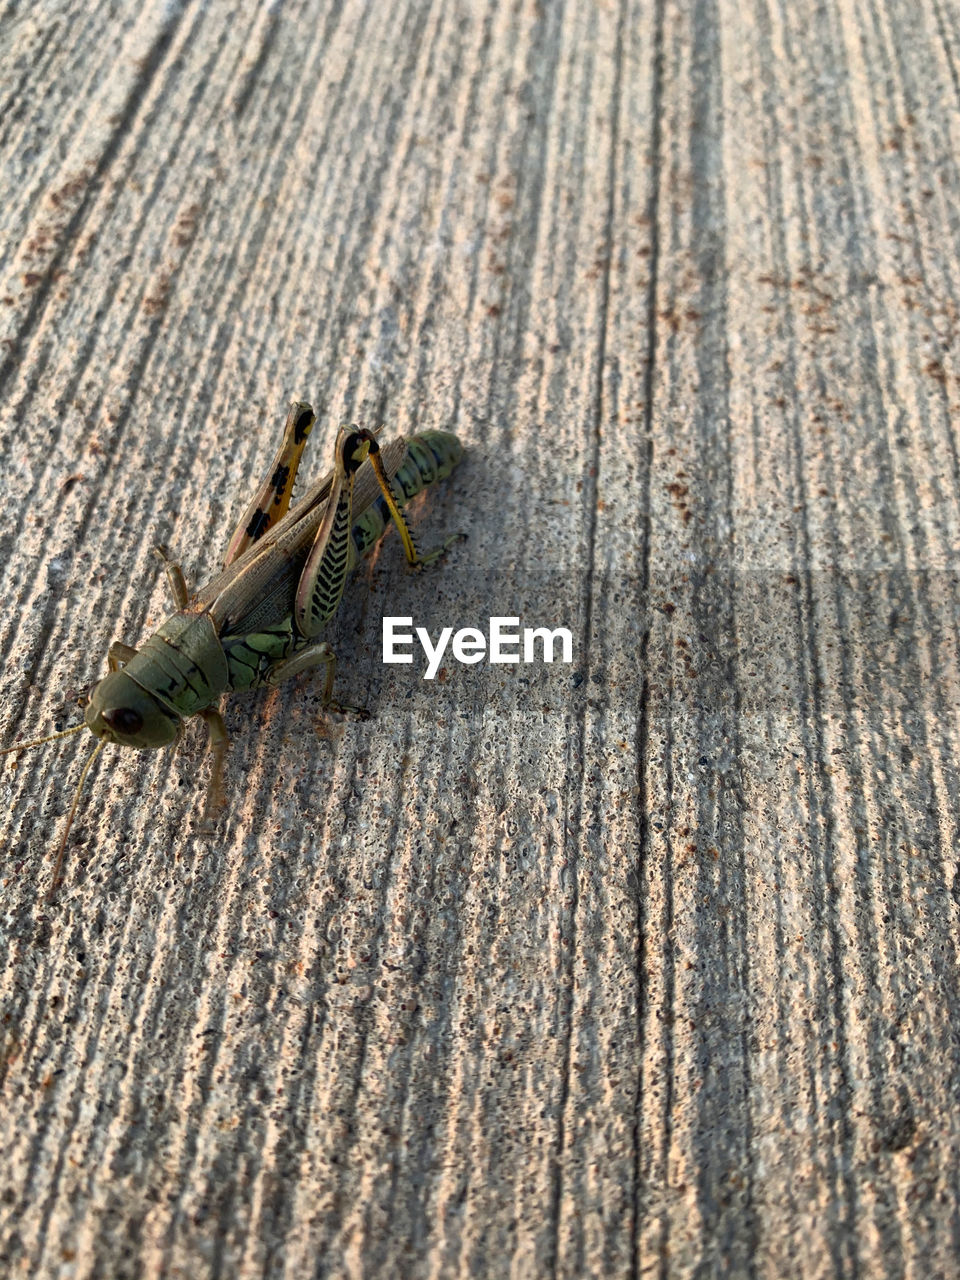 HIGH ANGLE VIEW OF GRASSHOPPER ON WOOD